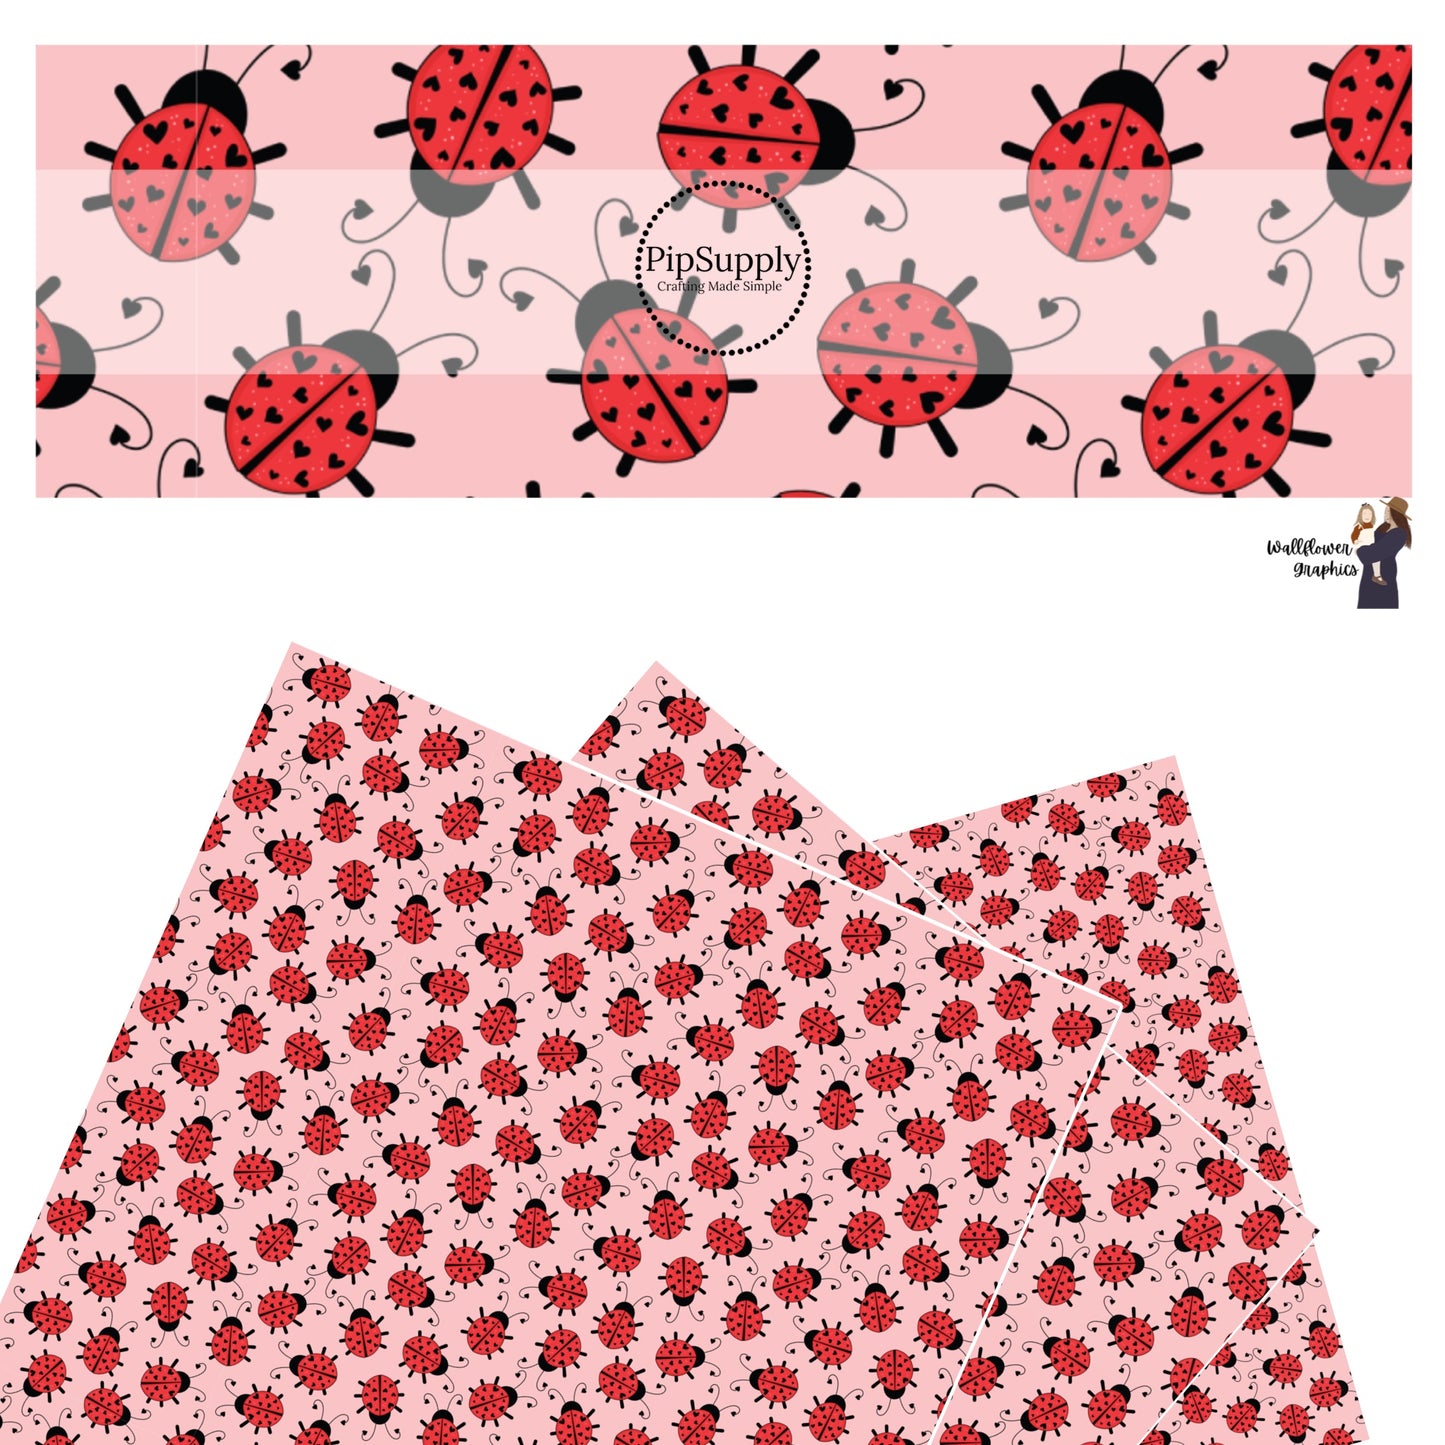 Black hearts on red lady bugs on pink faux leather sheets